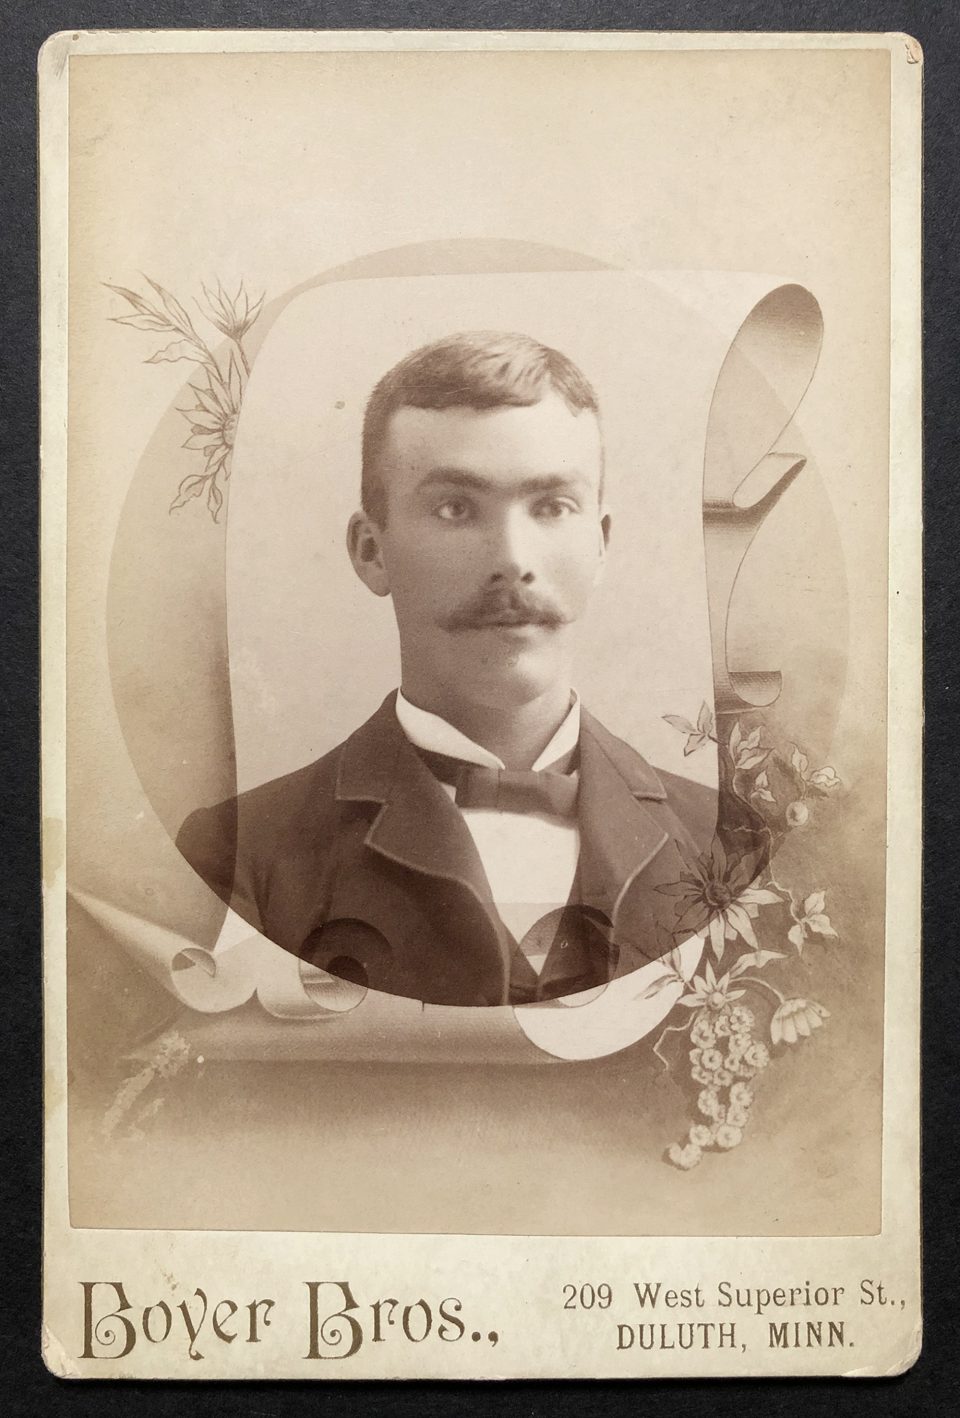 Cabinet card portrait of a young man with a mustache wearing a bow tie, by the studio of Boyer Brothers, located at 209 West Superior Street, in Duluth, Minnesota, possibly 1890s.